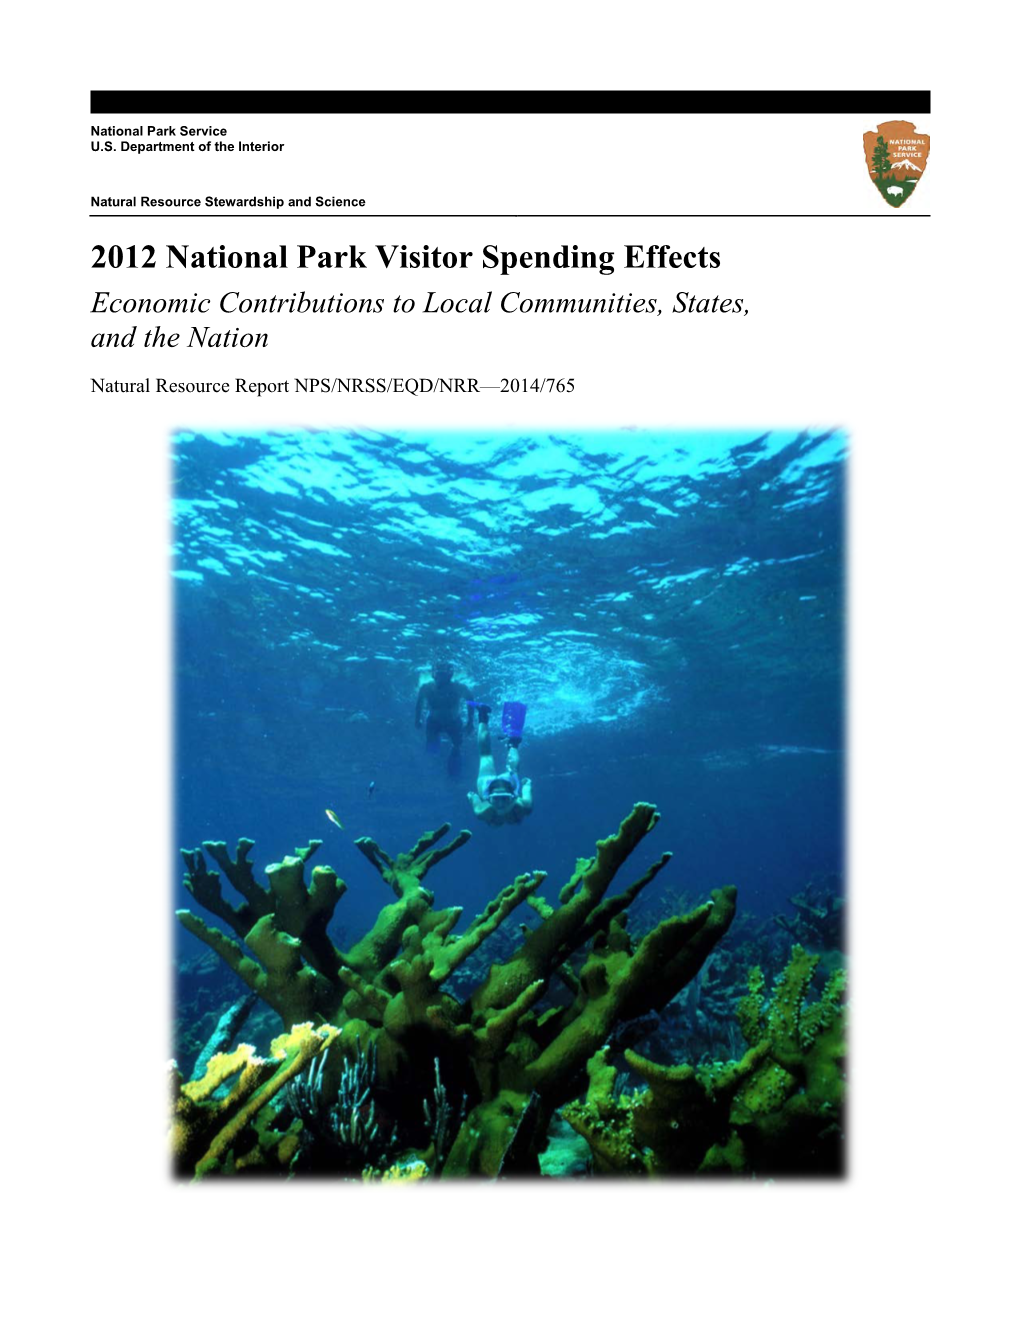 2012 National Park Visitor Spending Effects Report